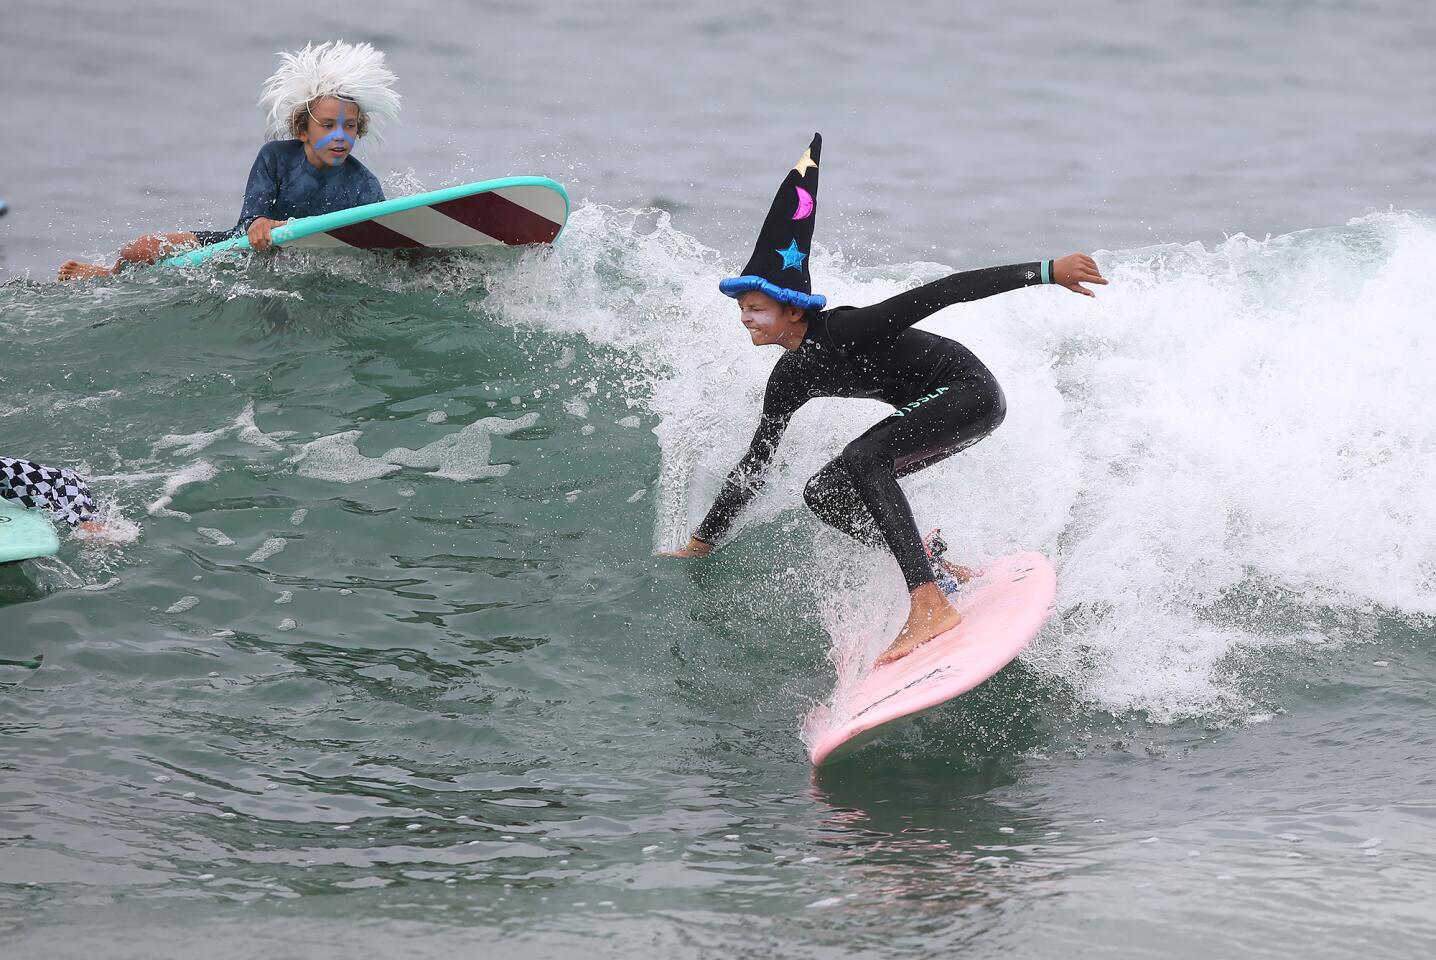 A camp participant dressed as merlin the wizard rides a wave on the final day of the Laguna Beach Surf School summer program for one last day of fun in the sun in Laguna Beach.